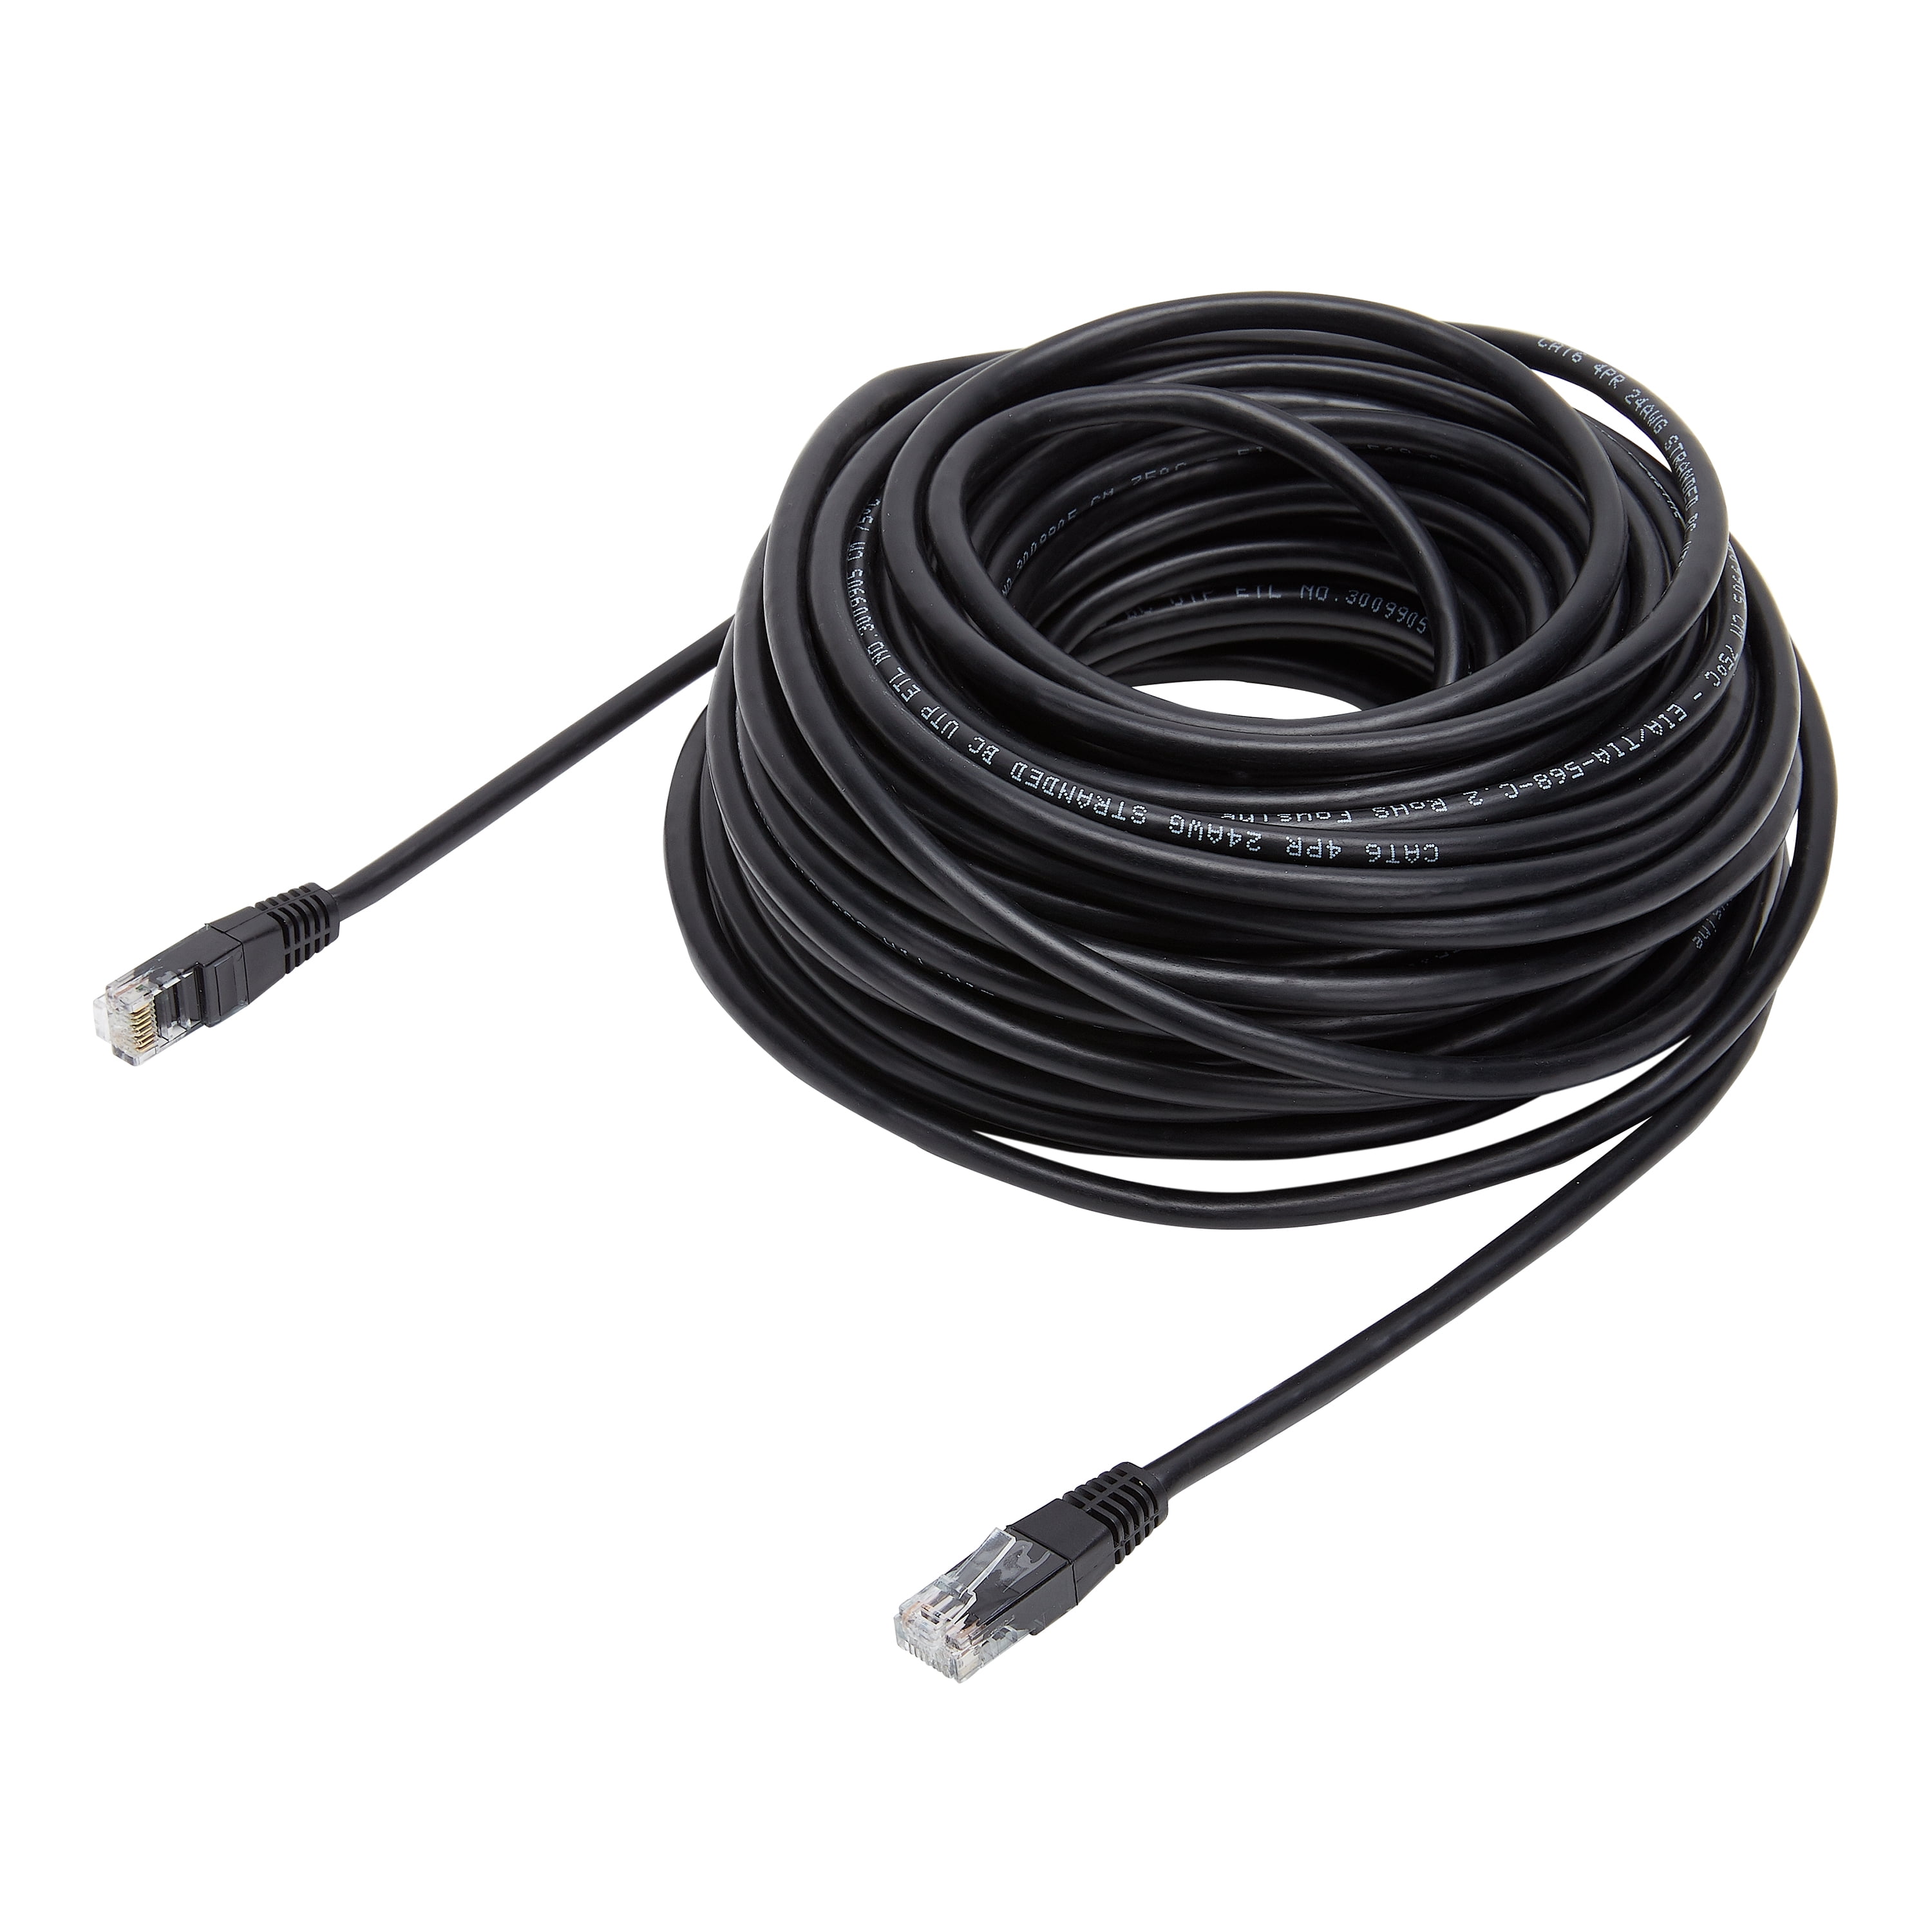 onn. CAT6 Networking Cable, 75 ft, Black